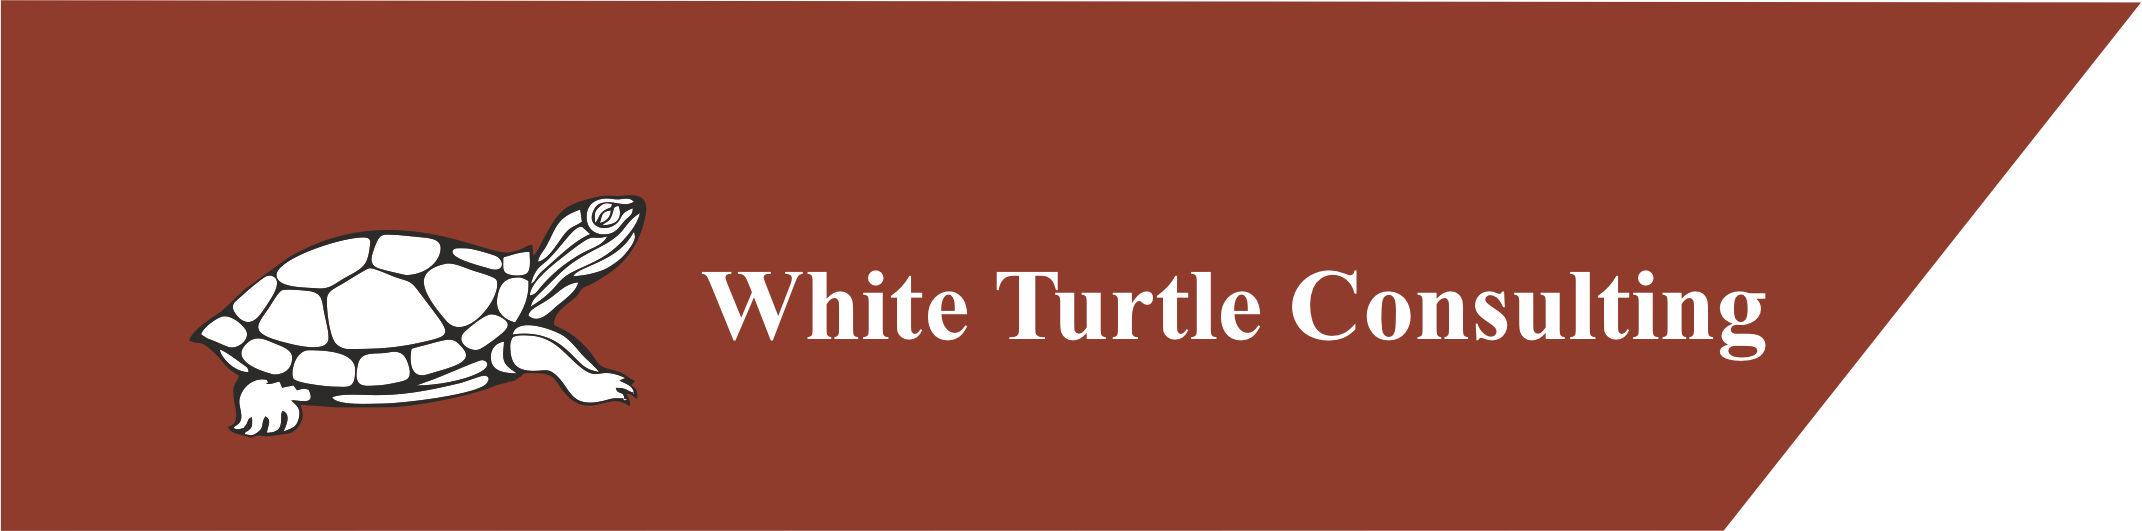 Trutle Consulting